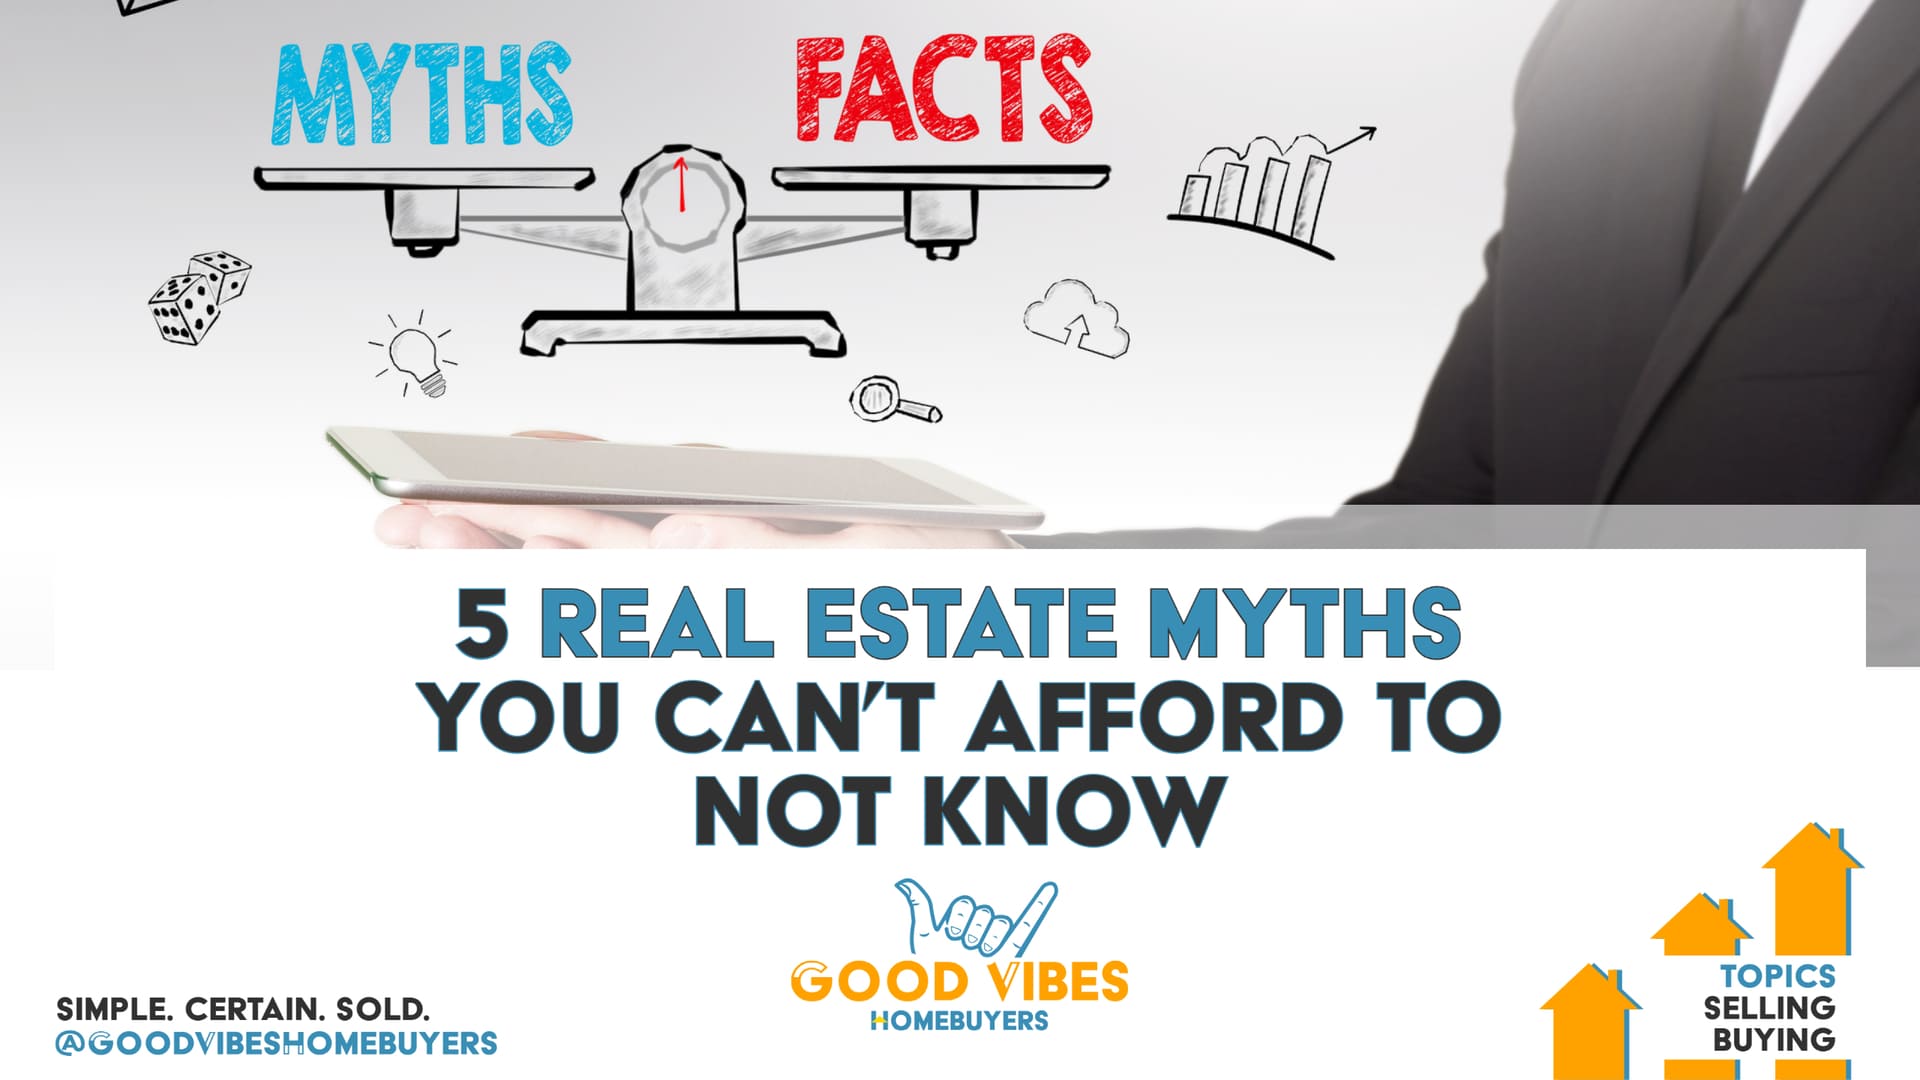 5 Real Estate Myths You Can't Afford to Not Know